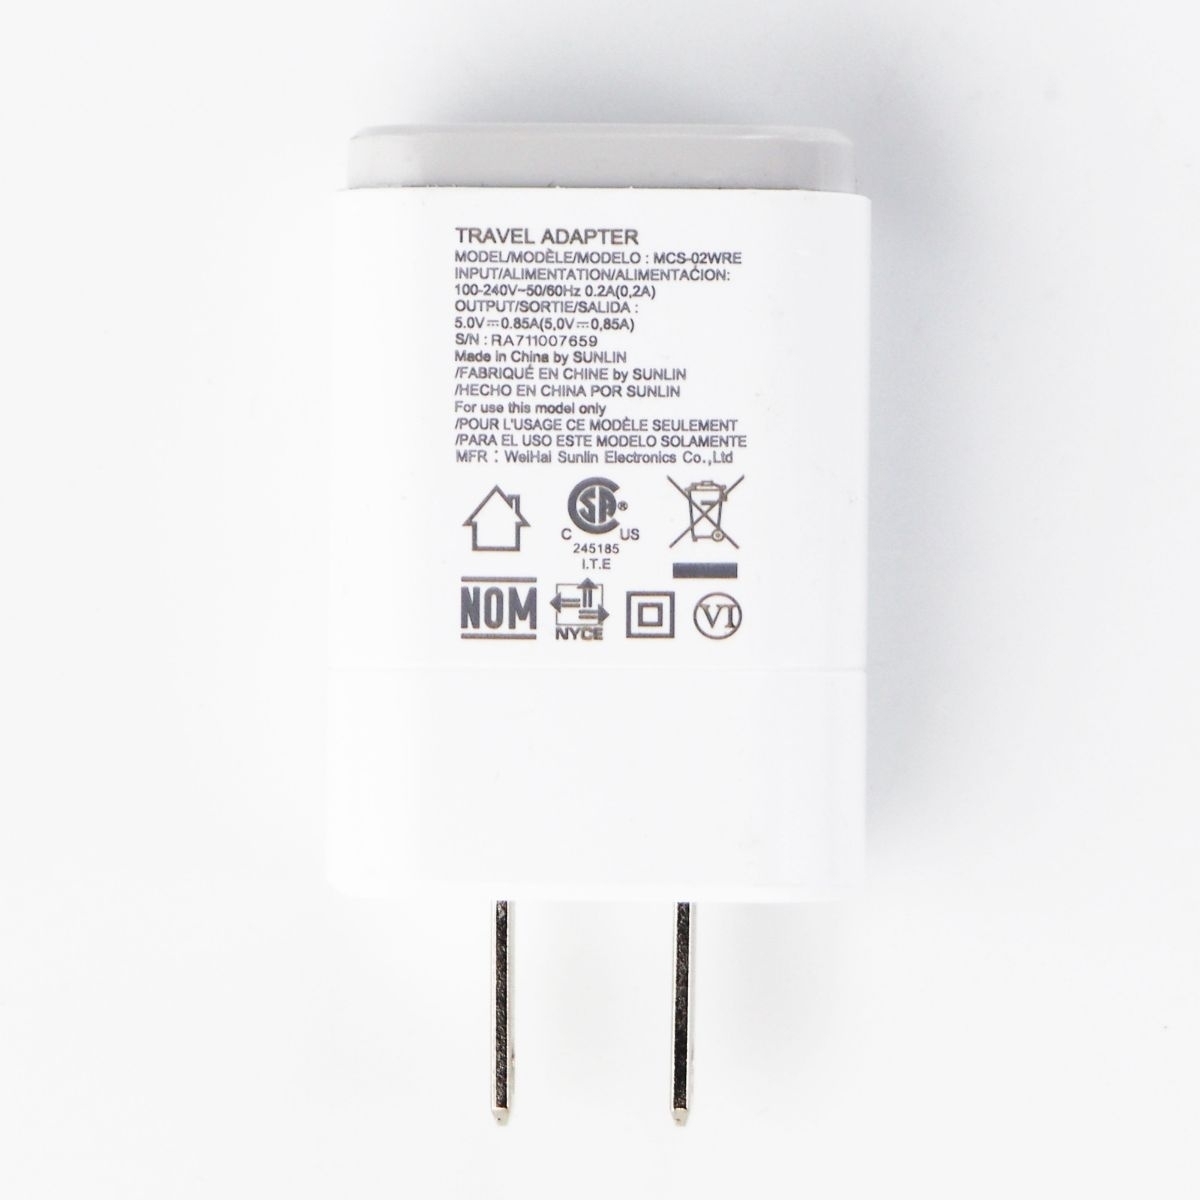 LG Travel Adapter Single 5V/0.85A USB Wall Charger (MCS-02WPE/RE) - White